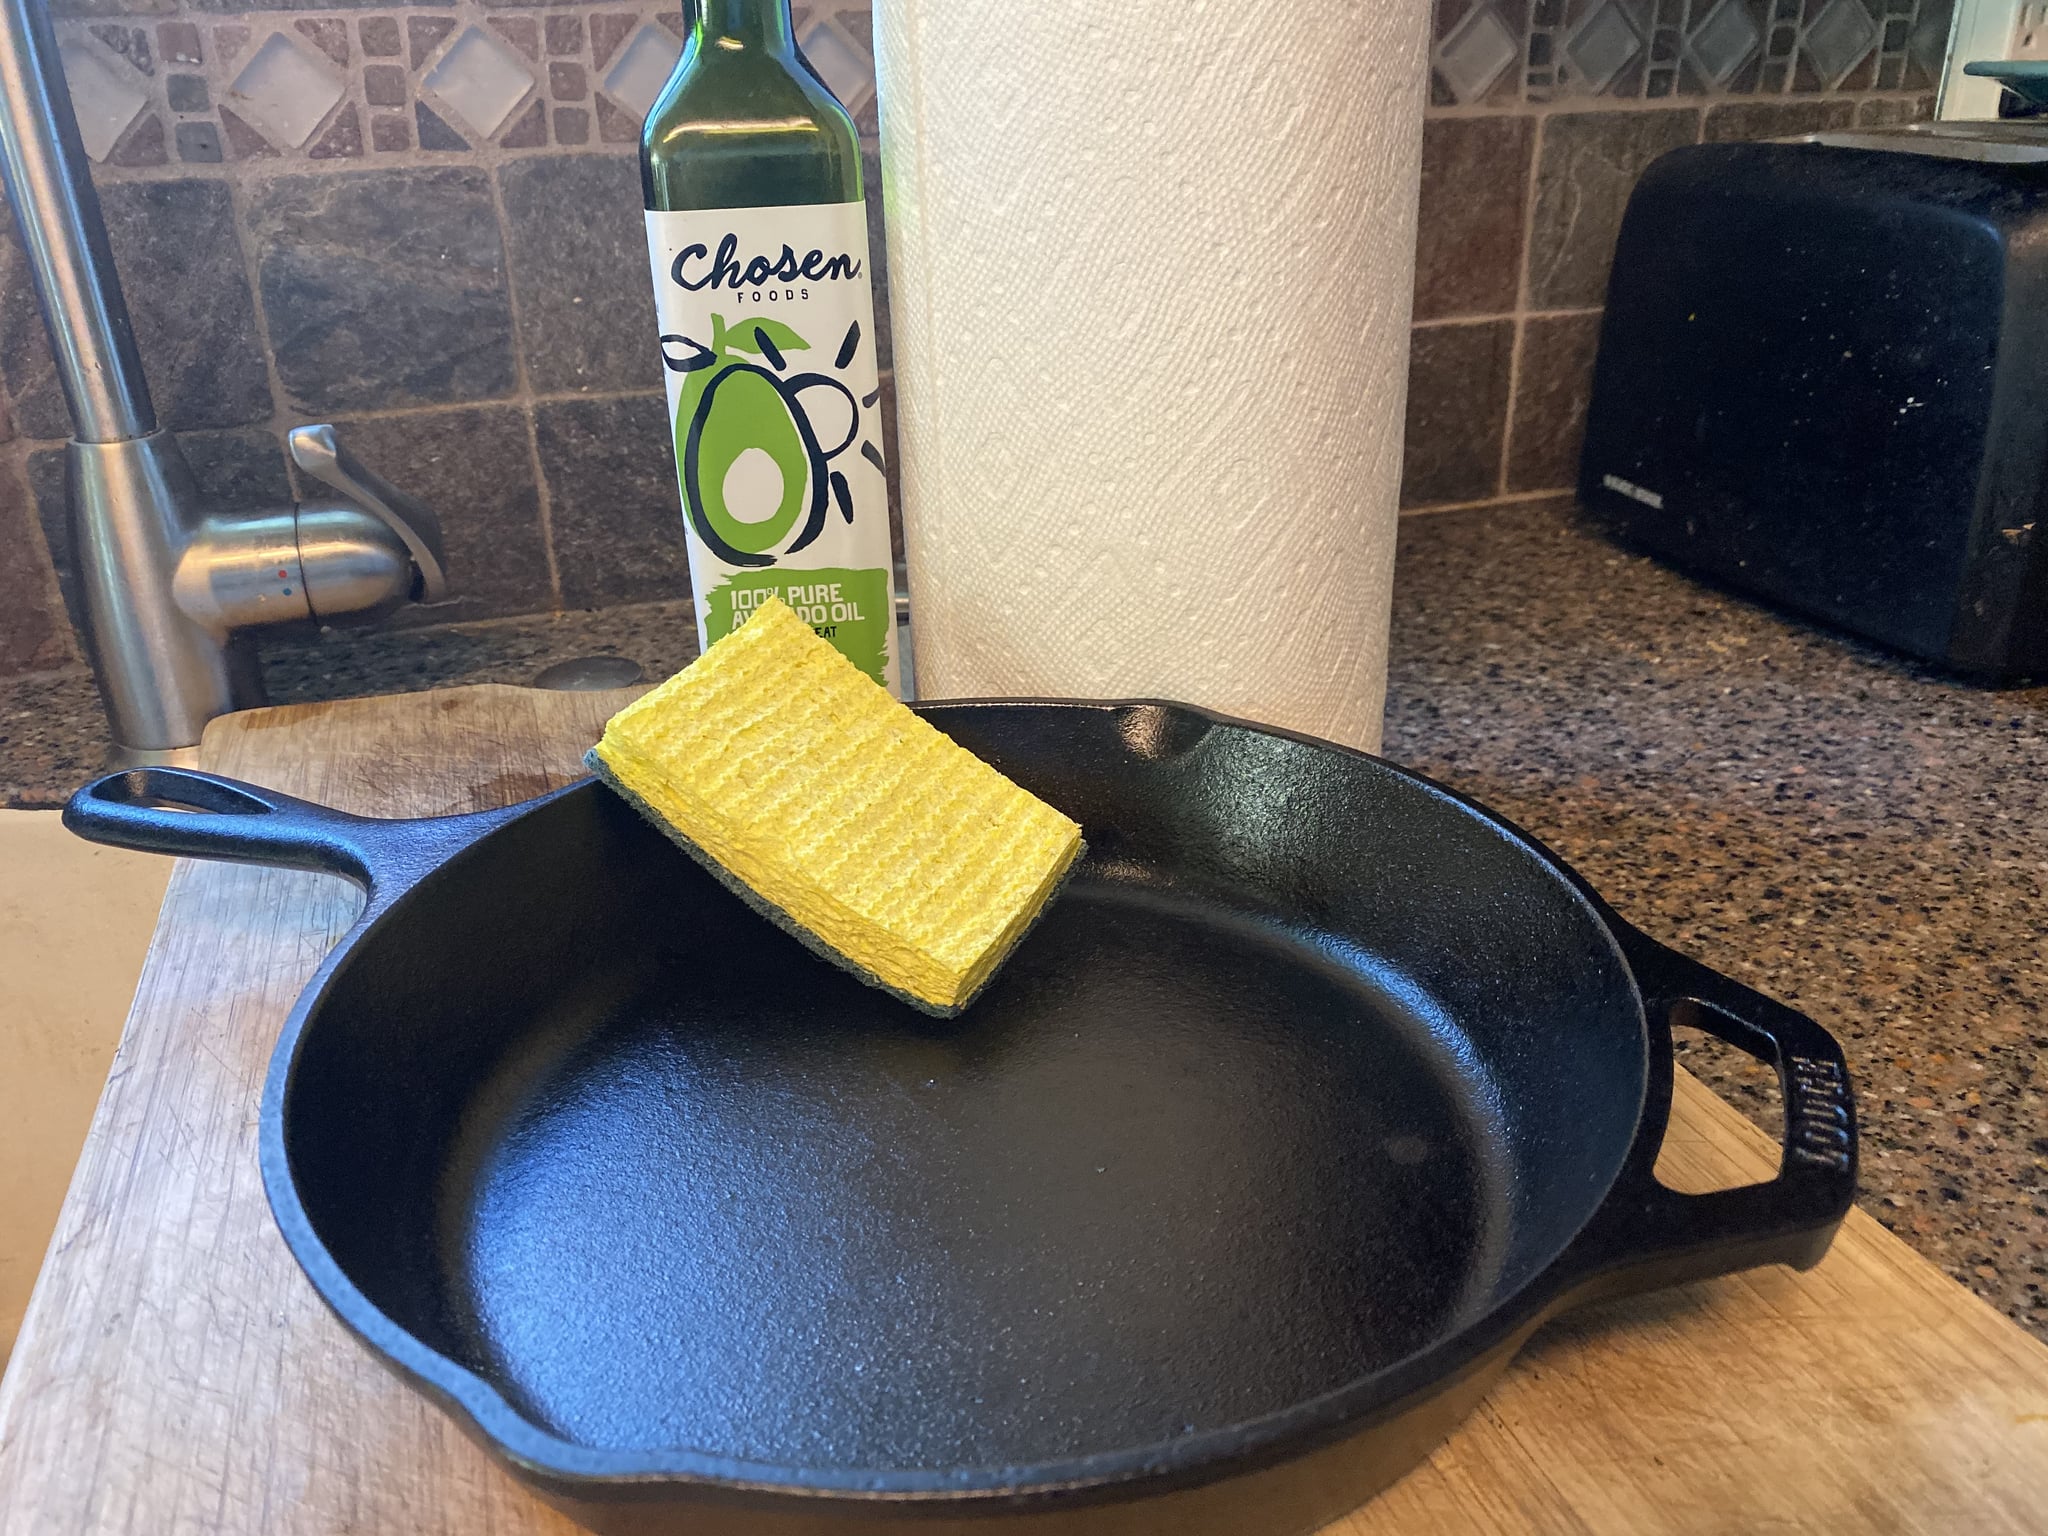 Caring for Cast Iron Cookware